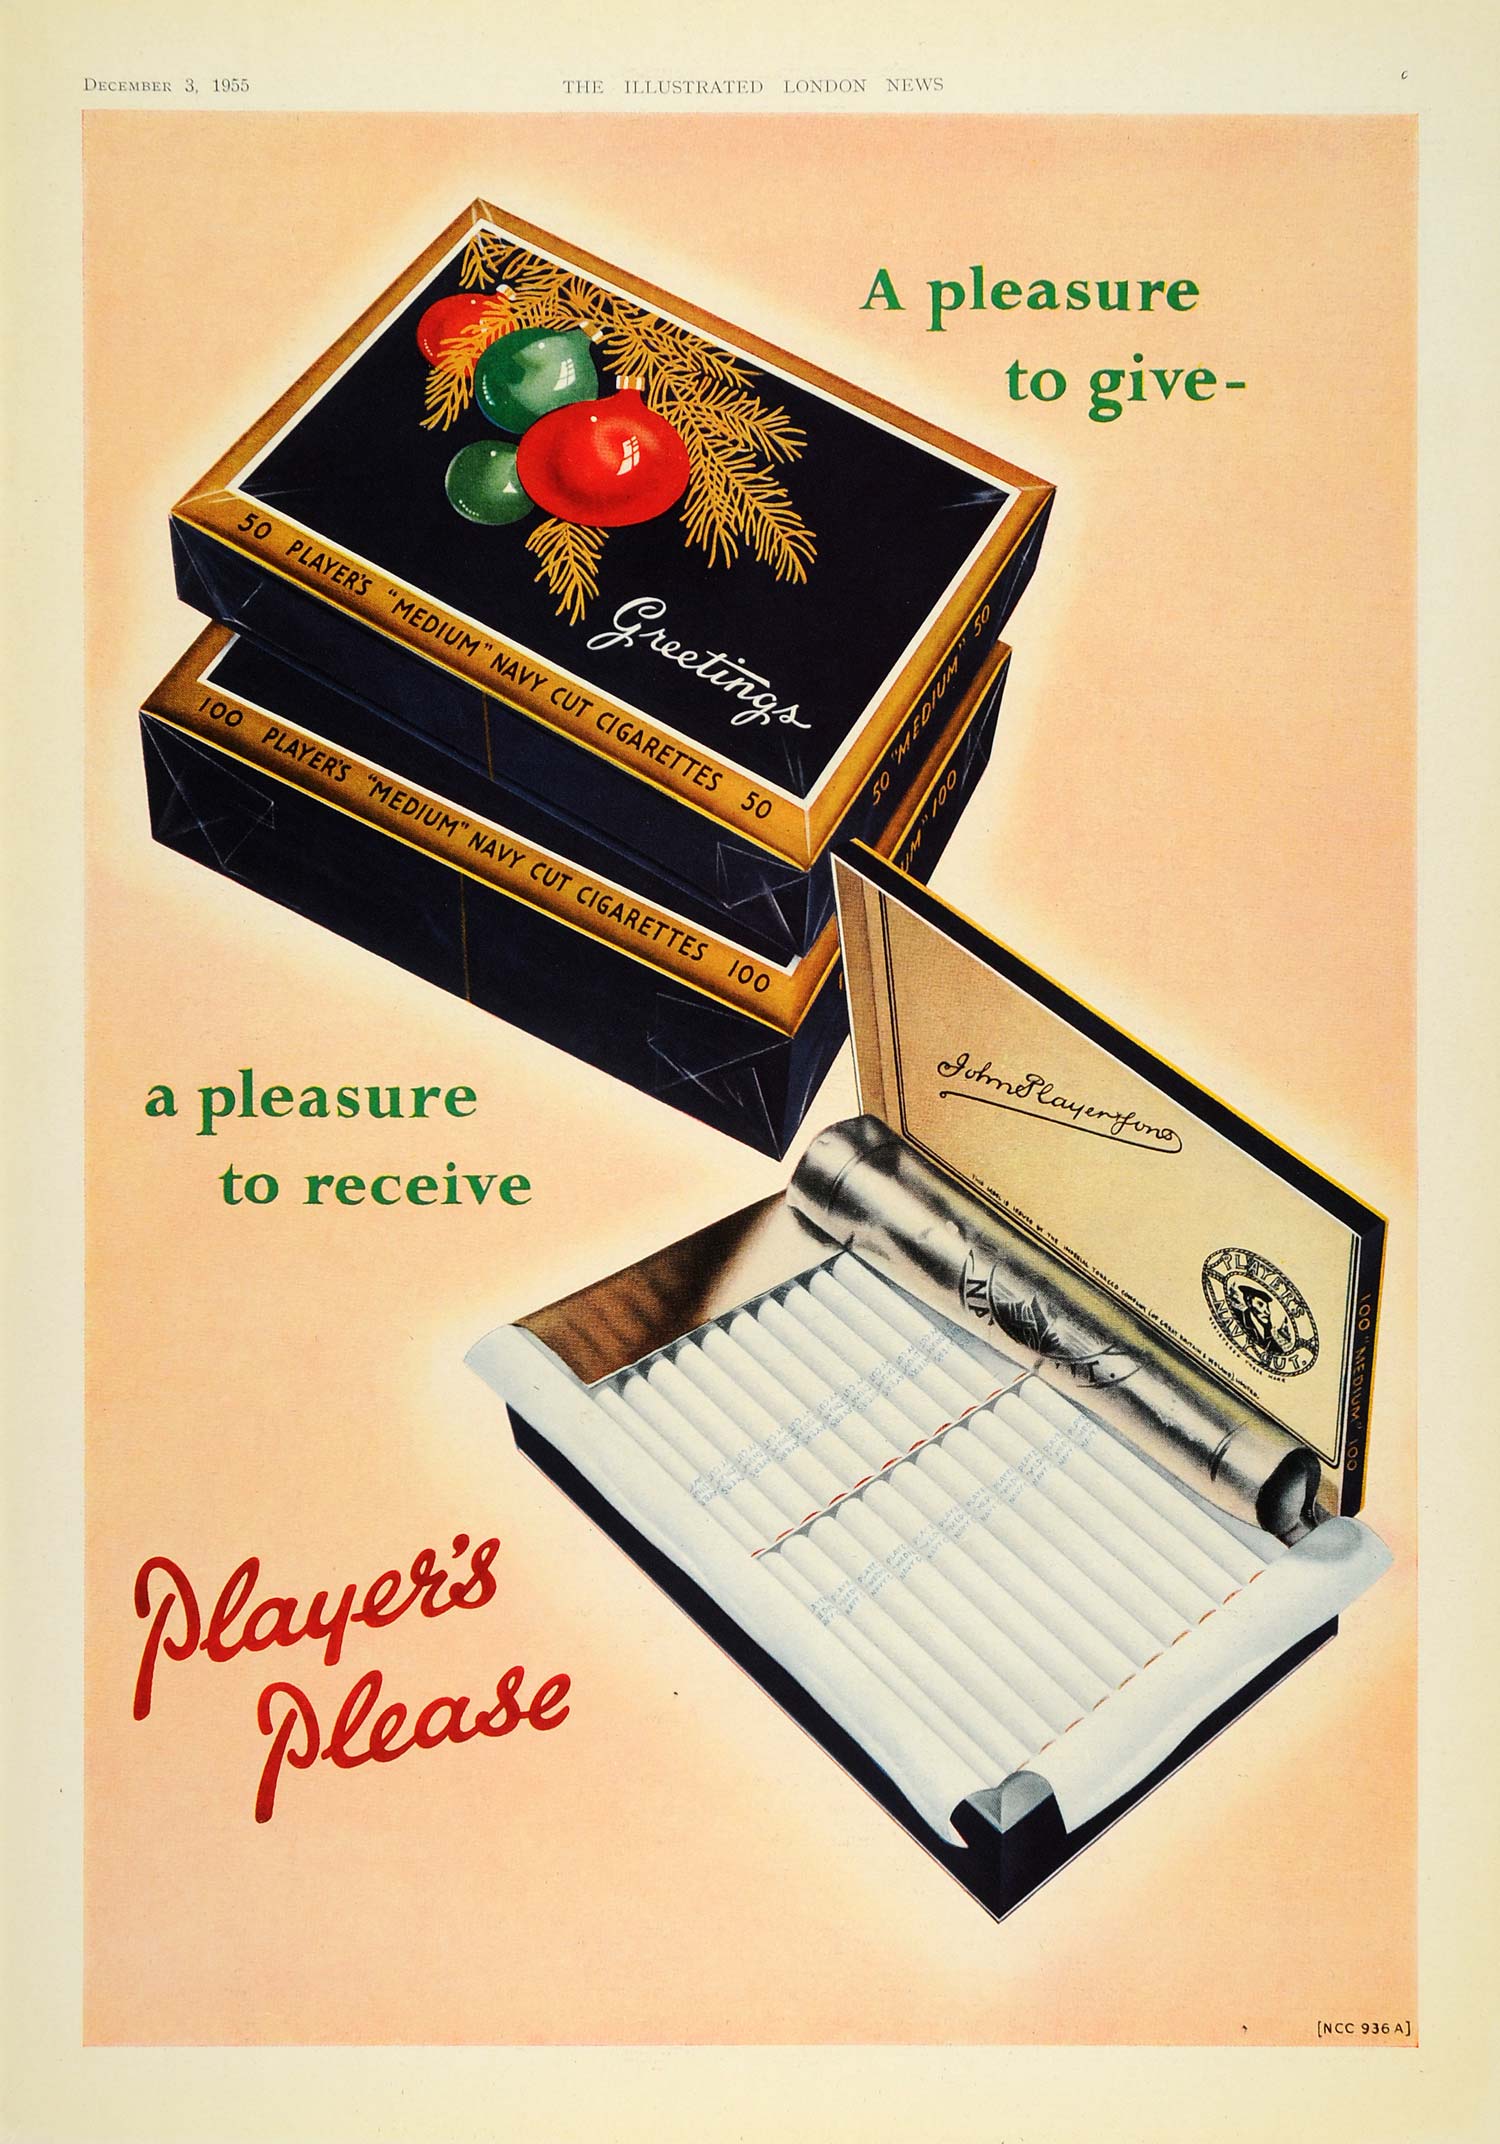 Cigarettes manufactured from Navy Cut Tobacco by John Player